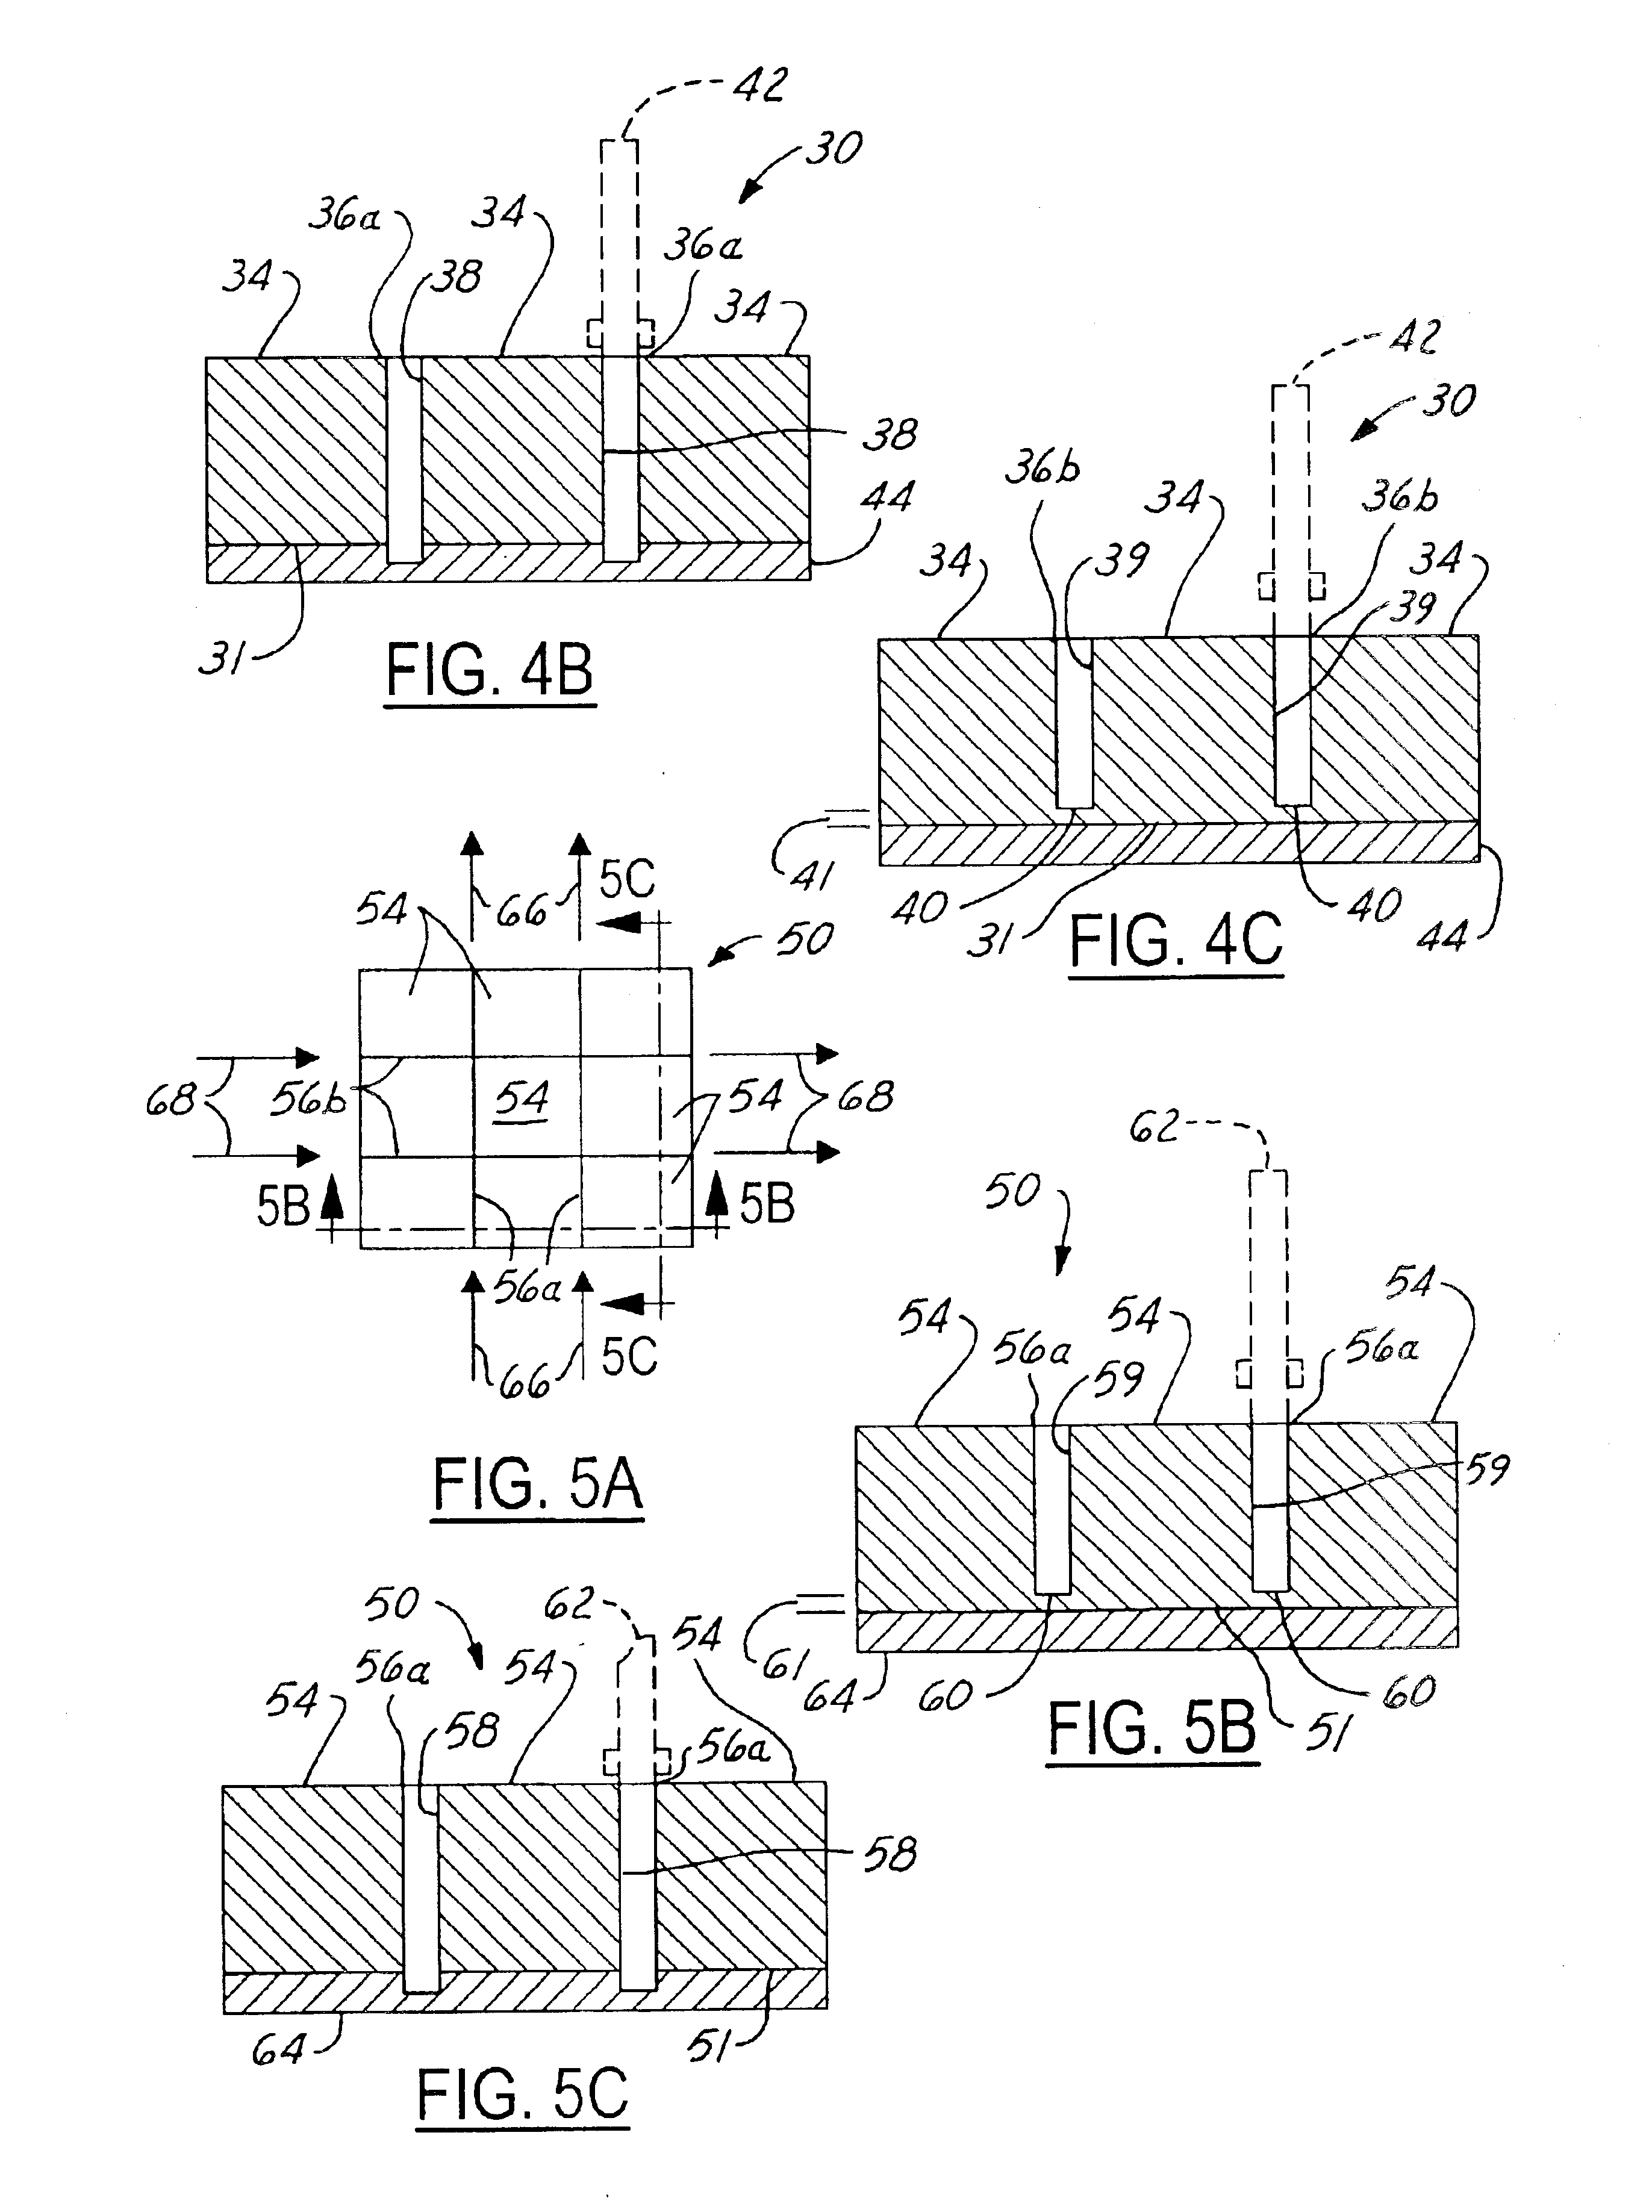 Process for separating dies on a wafer